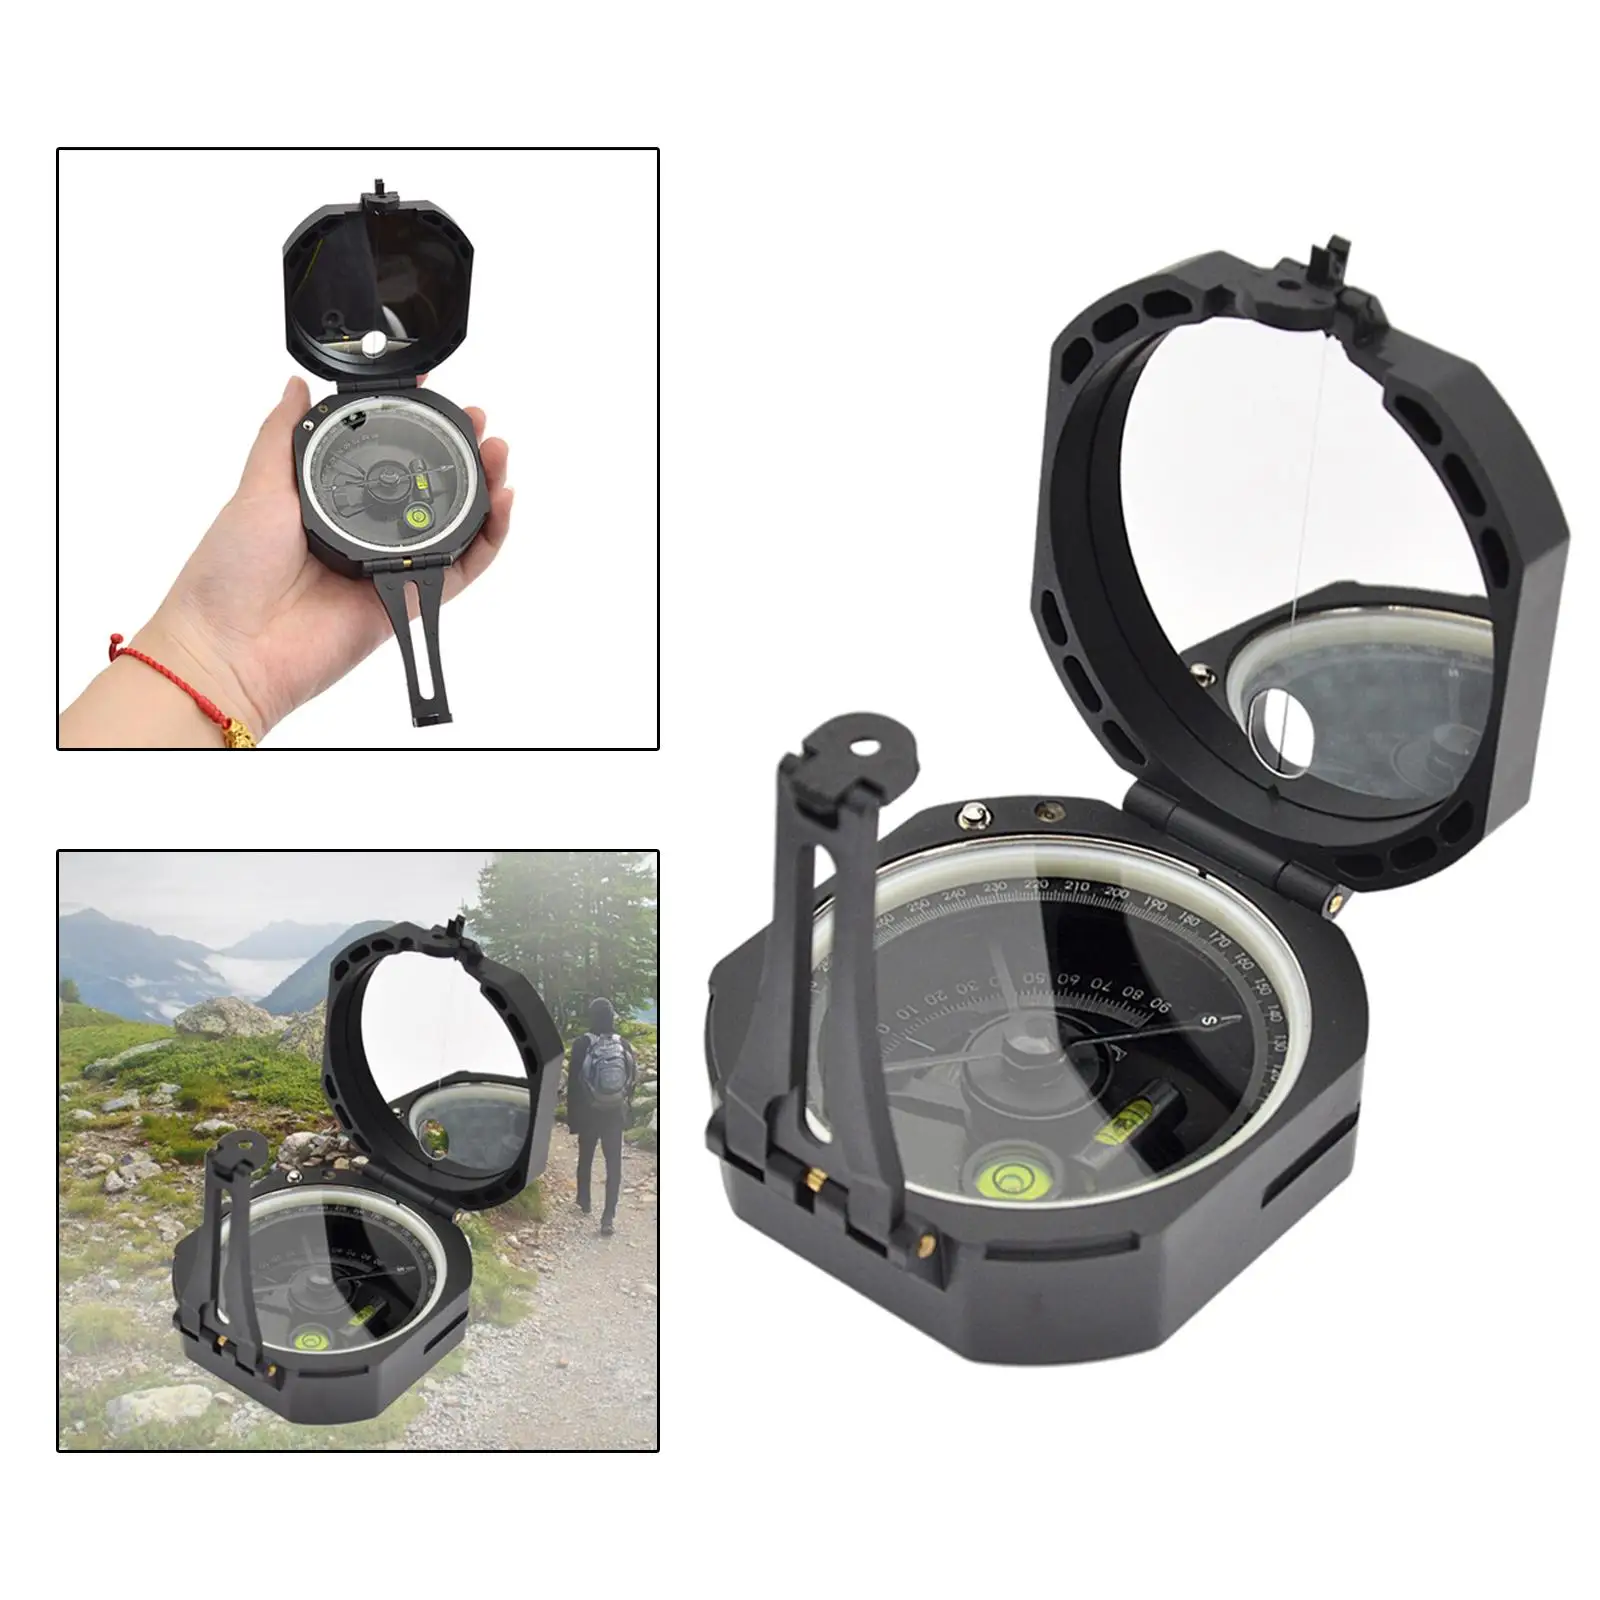 Multifunction Camping Compass Mirror with Pouch Lightweight Pocket for